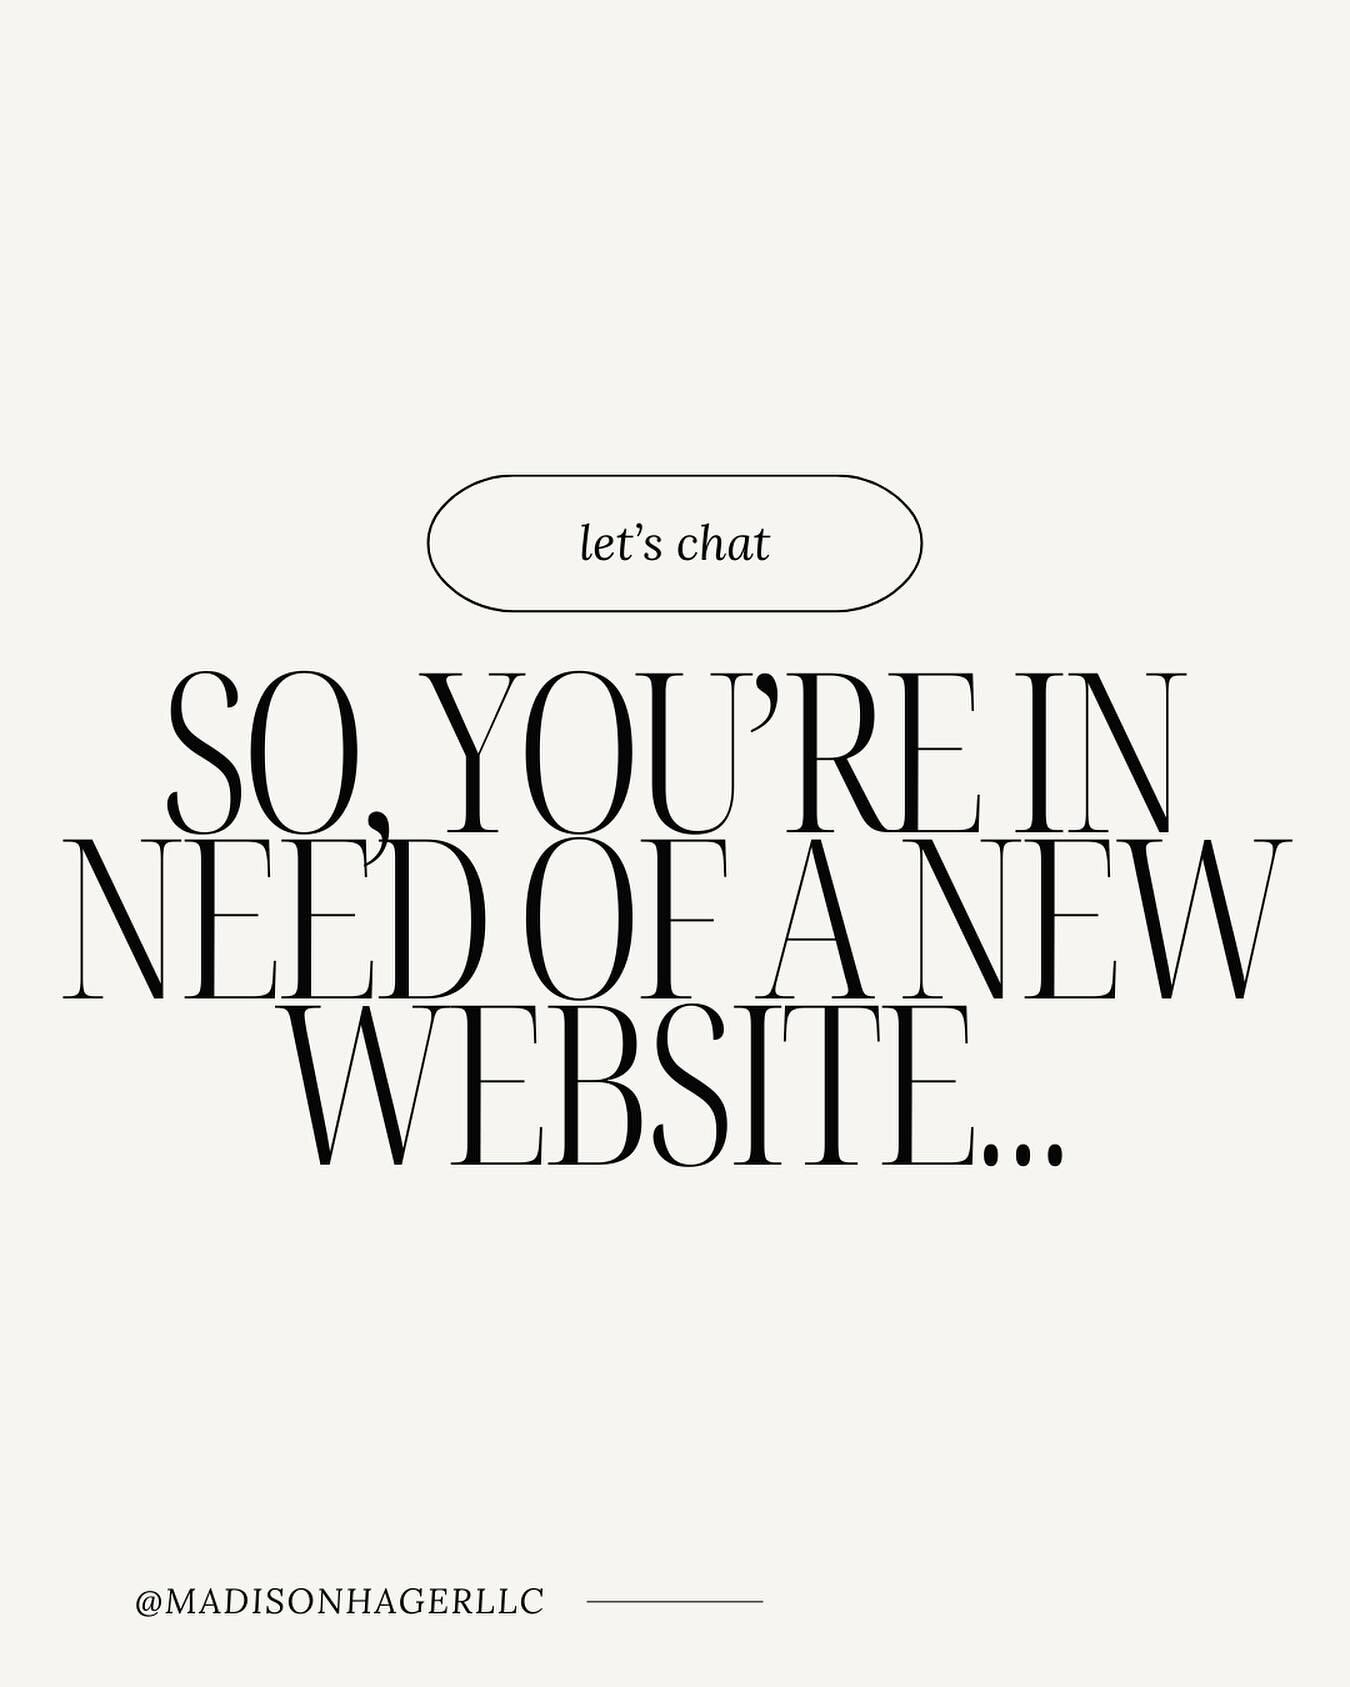 A new website might be in your future if... 👇🏼

+ Your current site doesn't reflect your personal style
+ You're rebranding with new colors &amp; fonts
+ You want to enhance user experience
+ Your current site has out-of-date design/graphics
+ You 